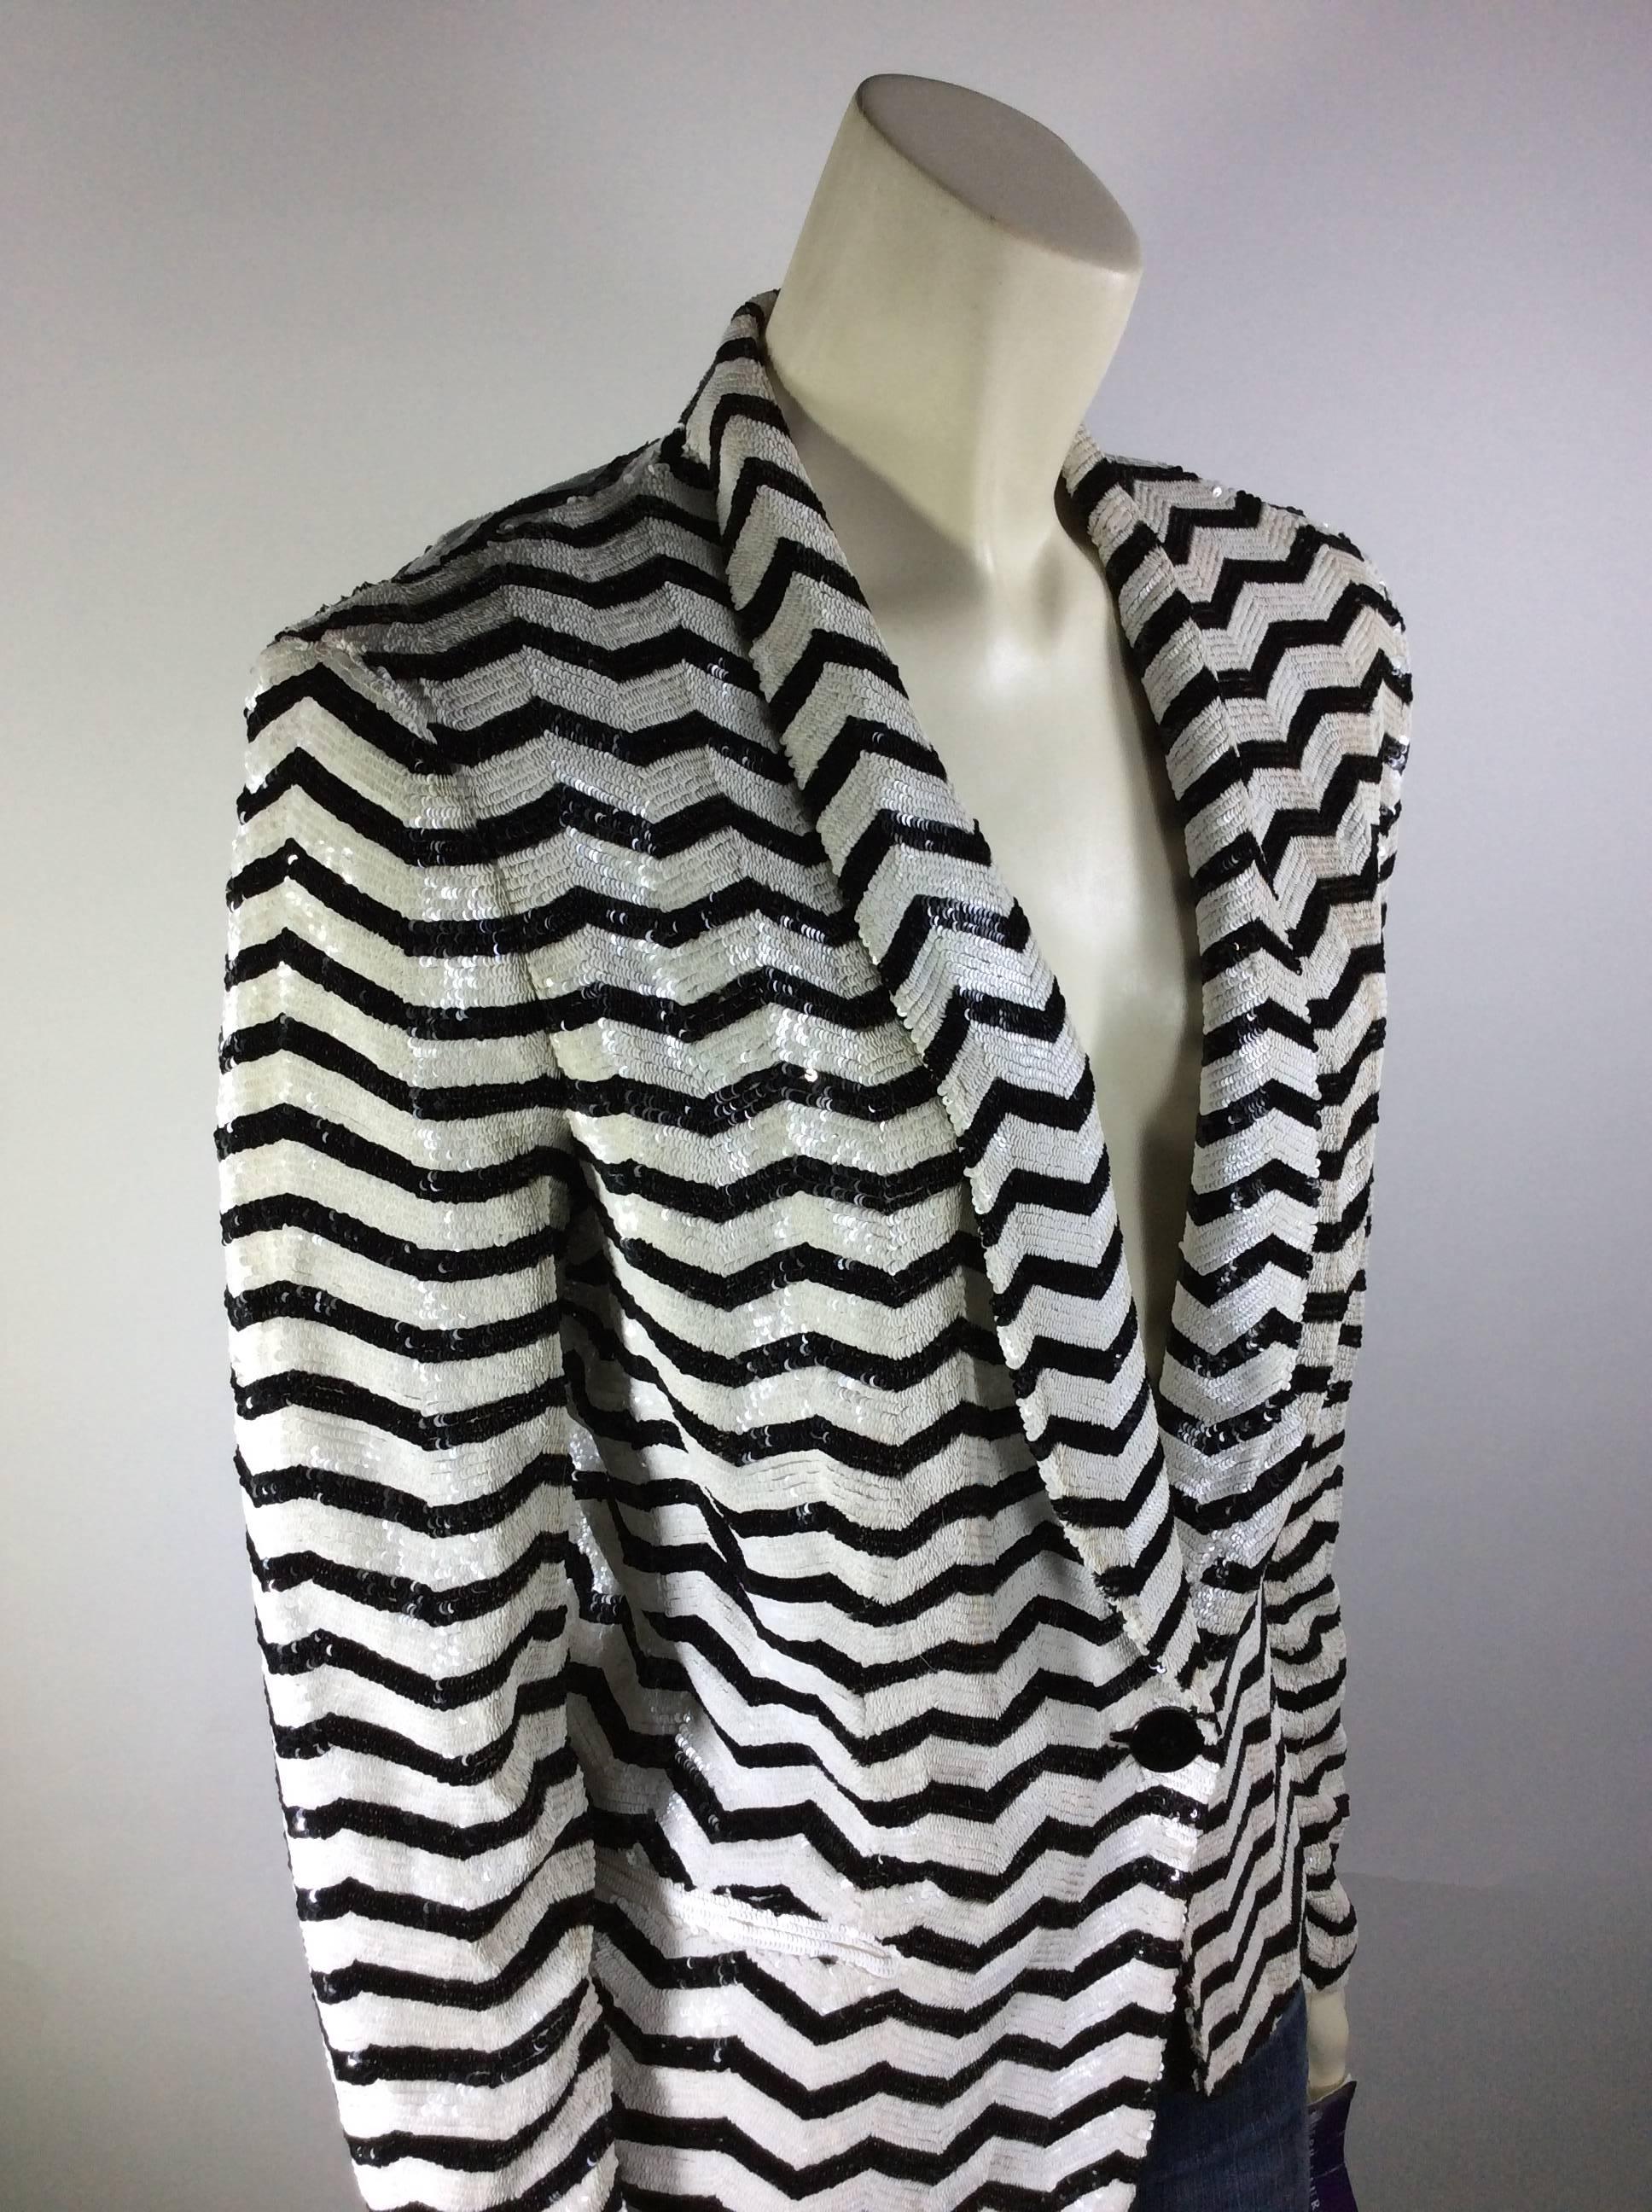 Ralph Lauren Unique Black and White Beaded Blazer
100% Silk Interior 
Single Black Button on Front to close
Two Front Pockets
